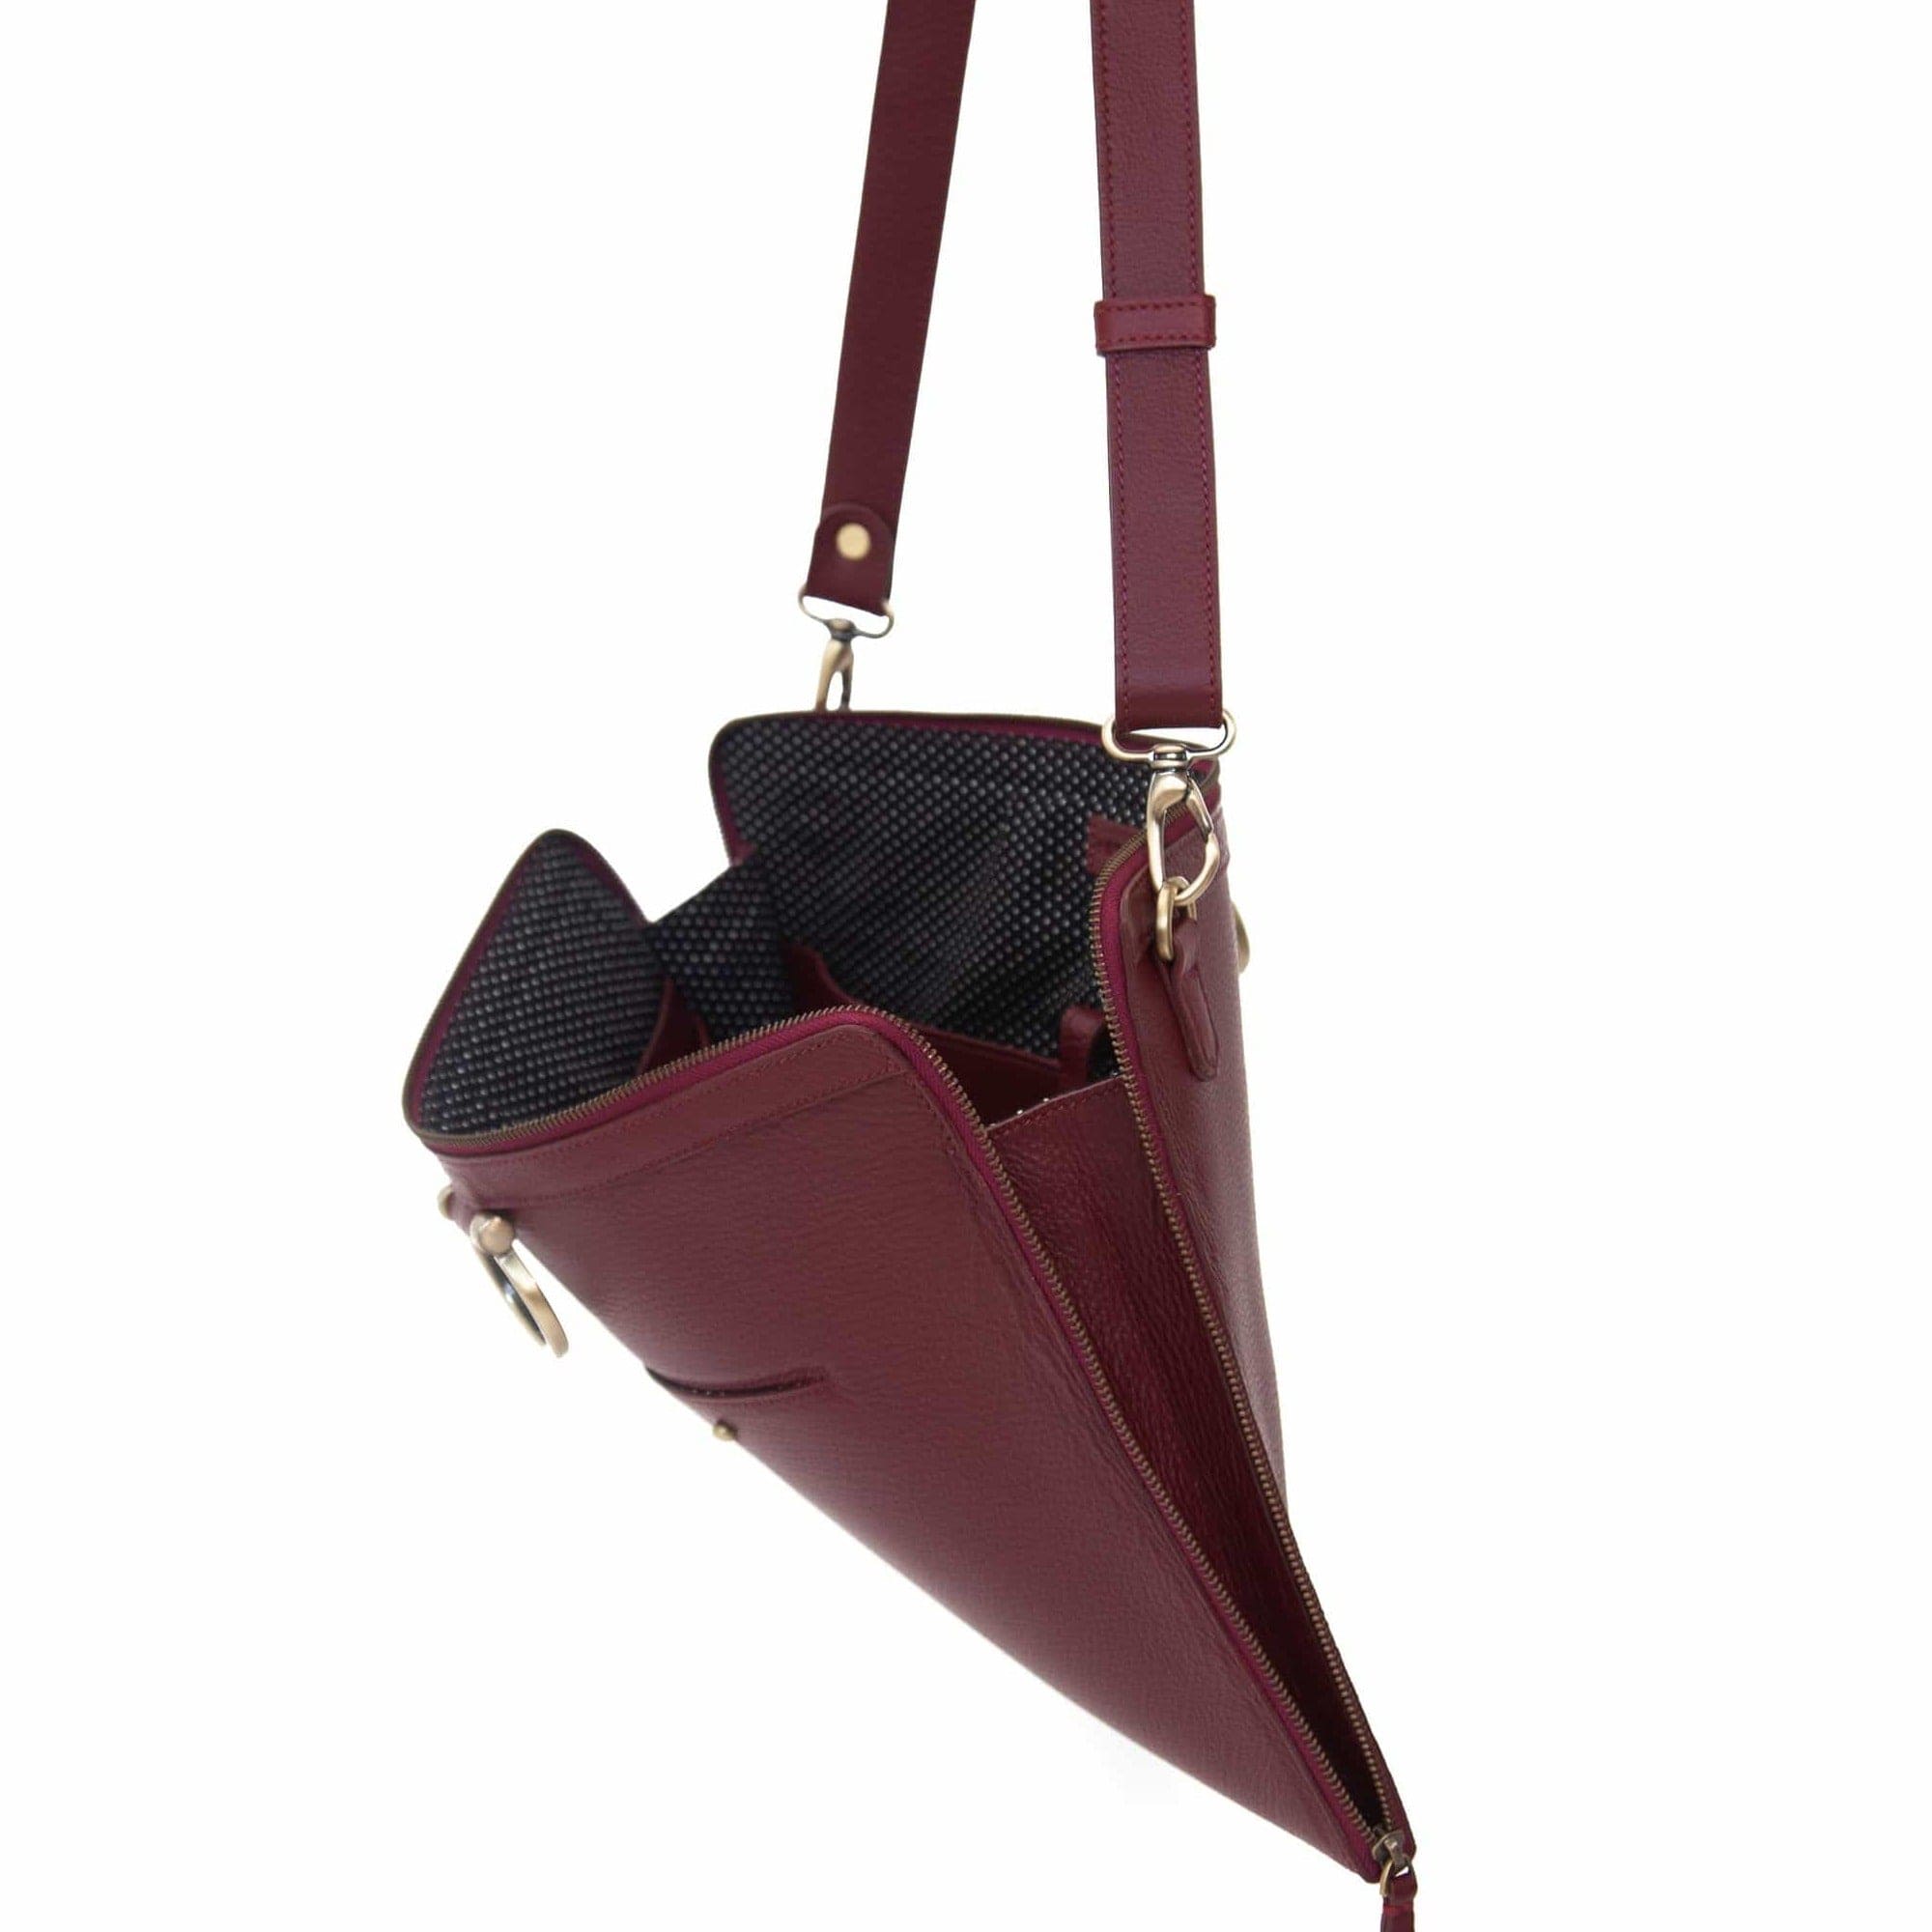 The M XL crossbody bag in deep red oil leather zips all the way around for a sleek, minimalist look.